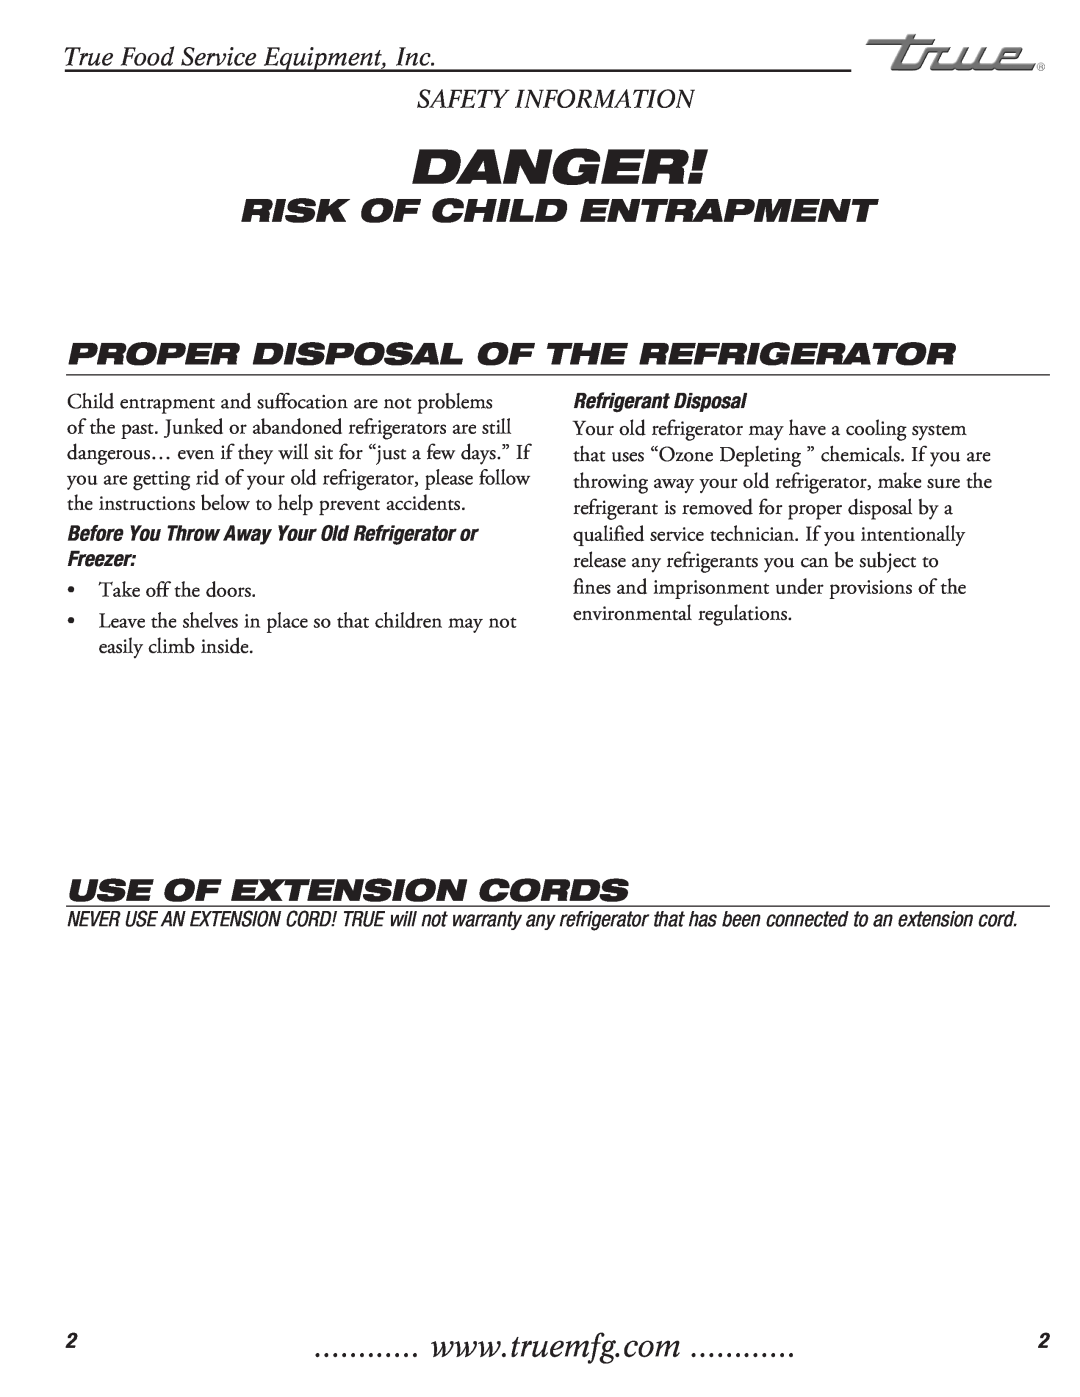 True Manufacturing Company TFP-32-12M-D-2 Risk Of Child Entrapment, Proper Disposal Of The Refrigerator, Danger 